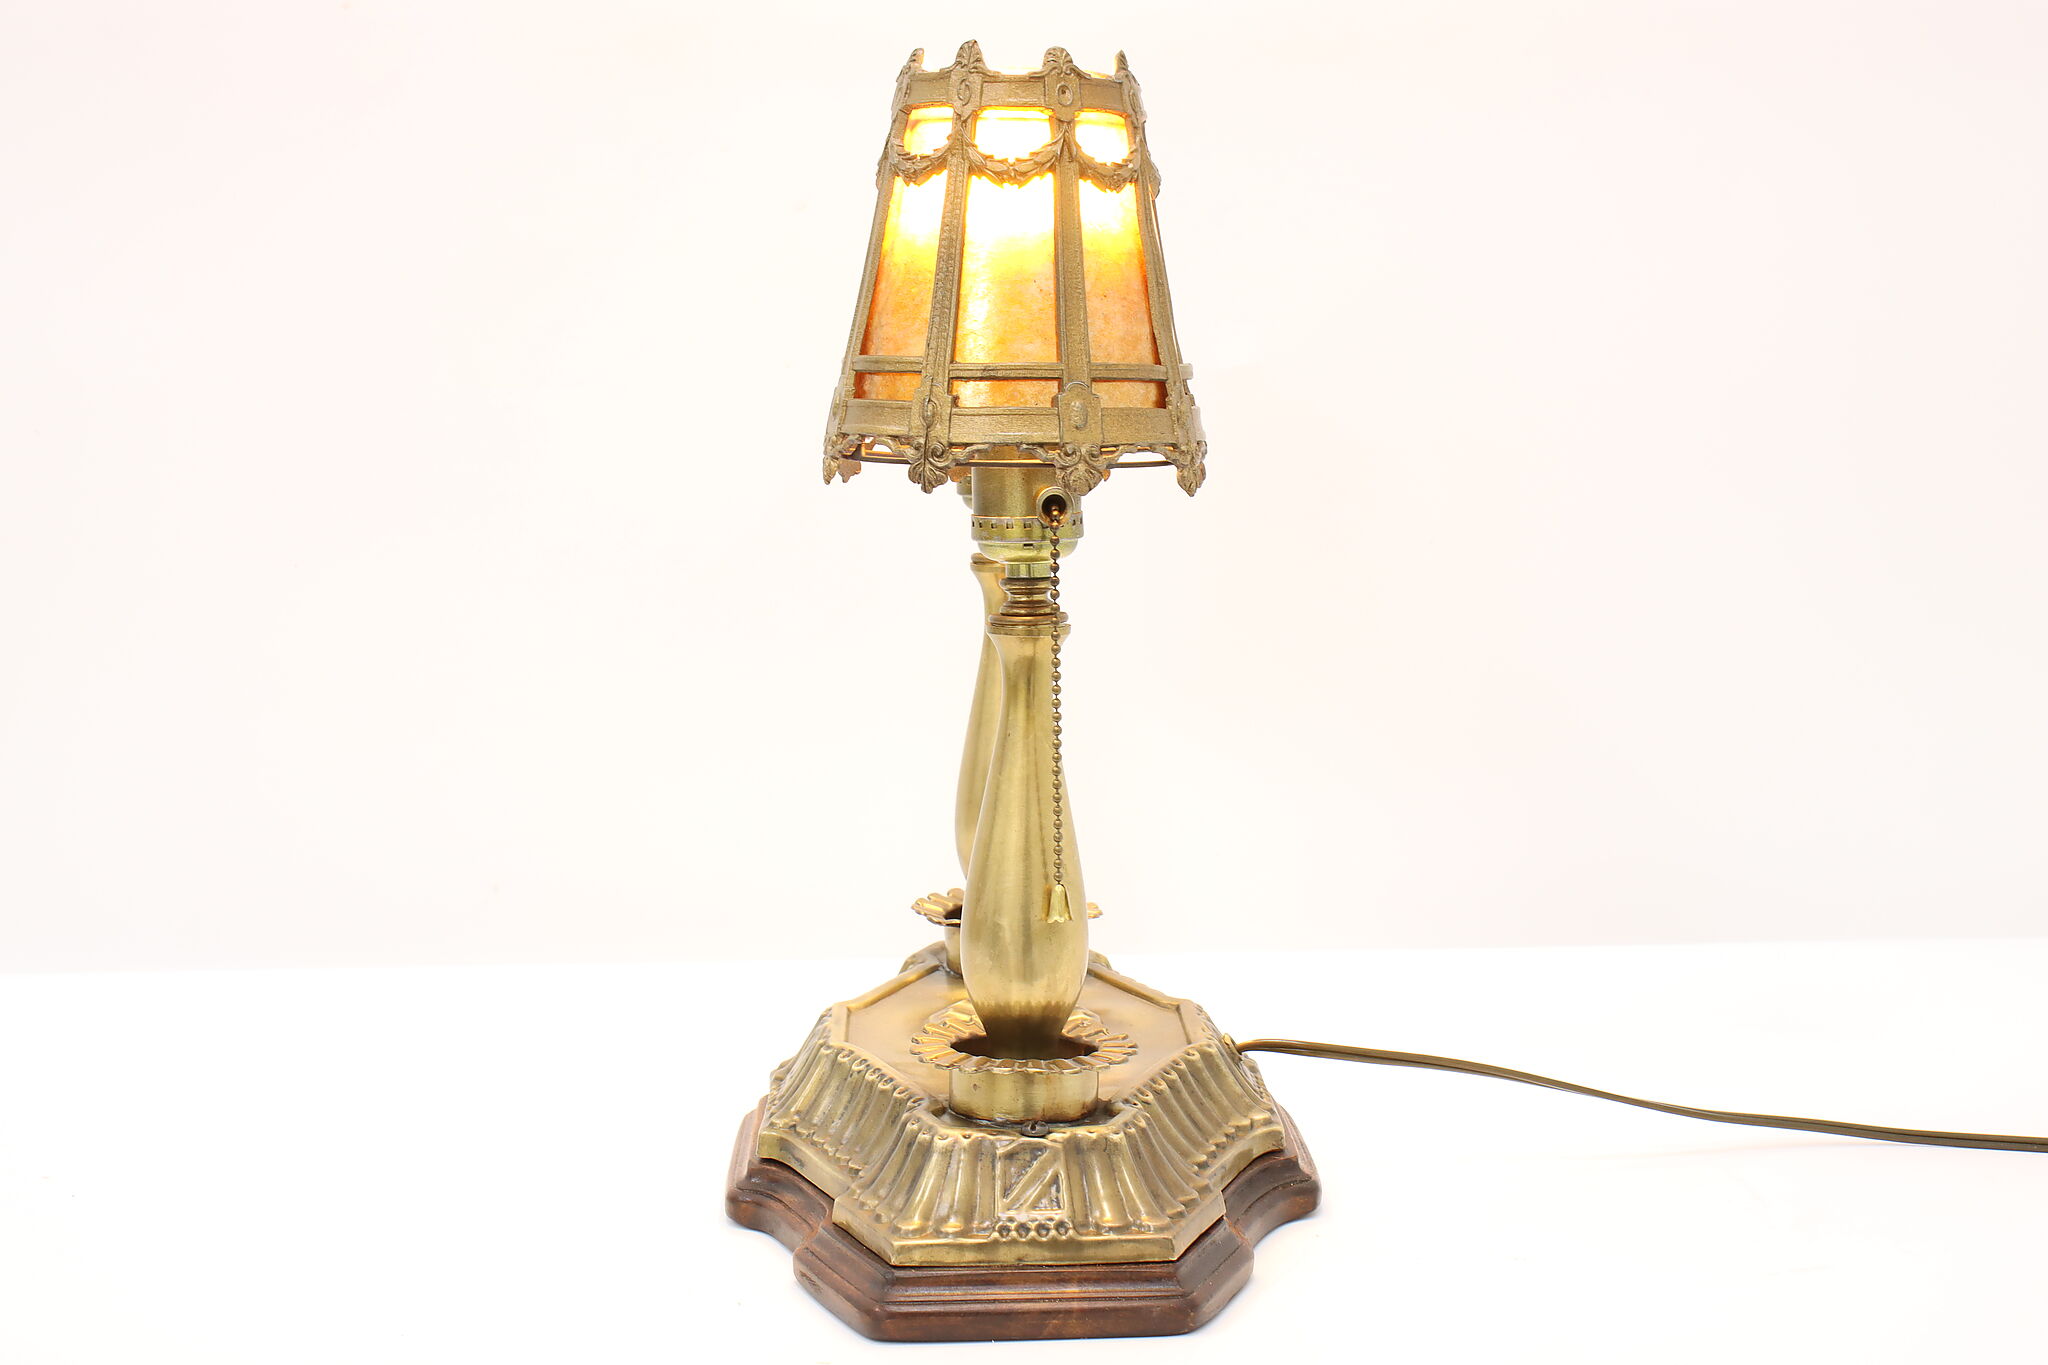 Antique Brass Art Deco Table Lamps Deals Discounted